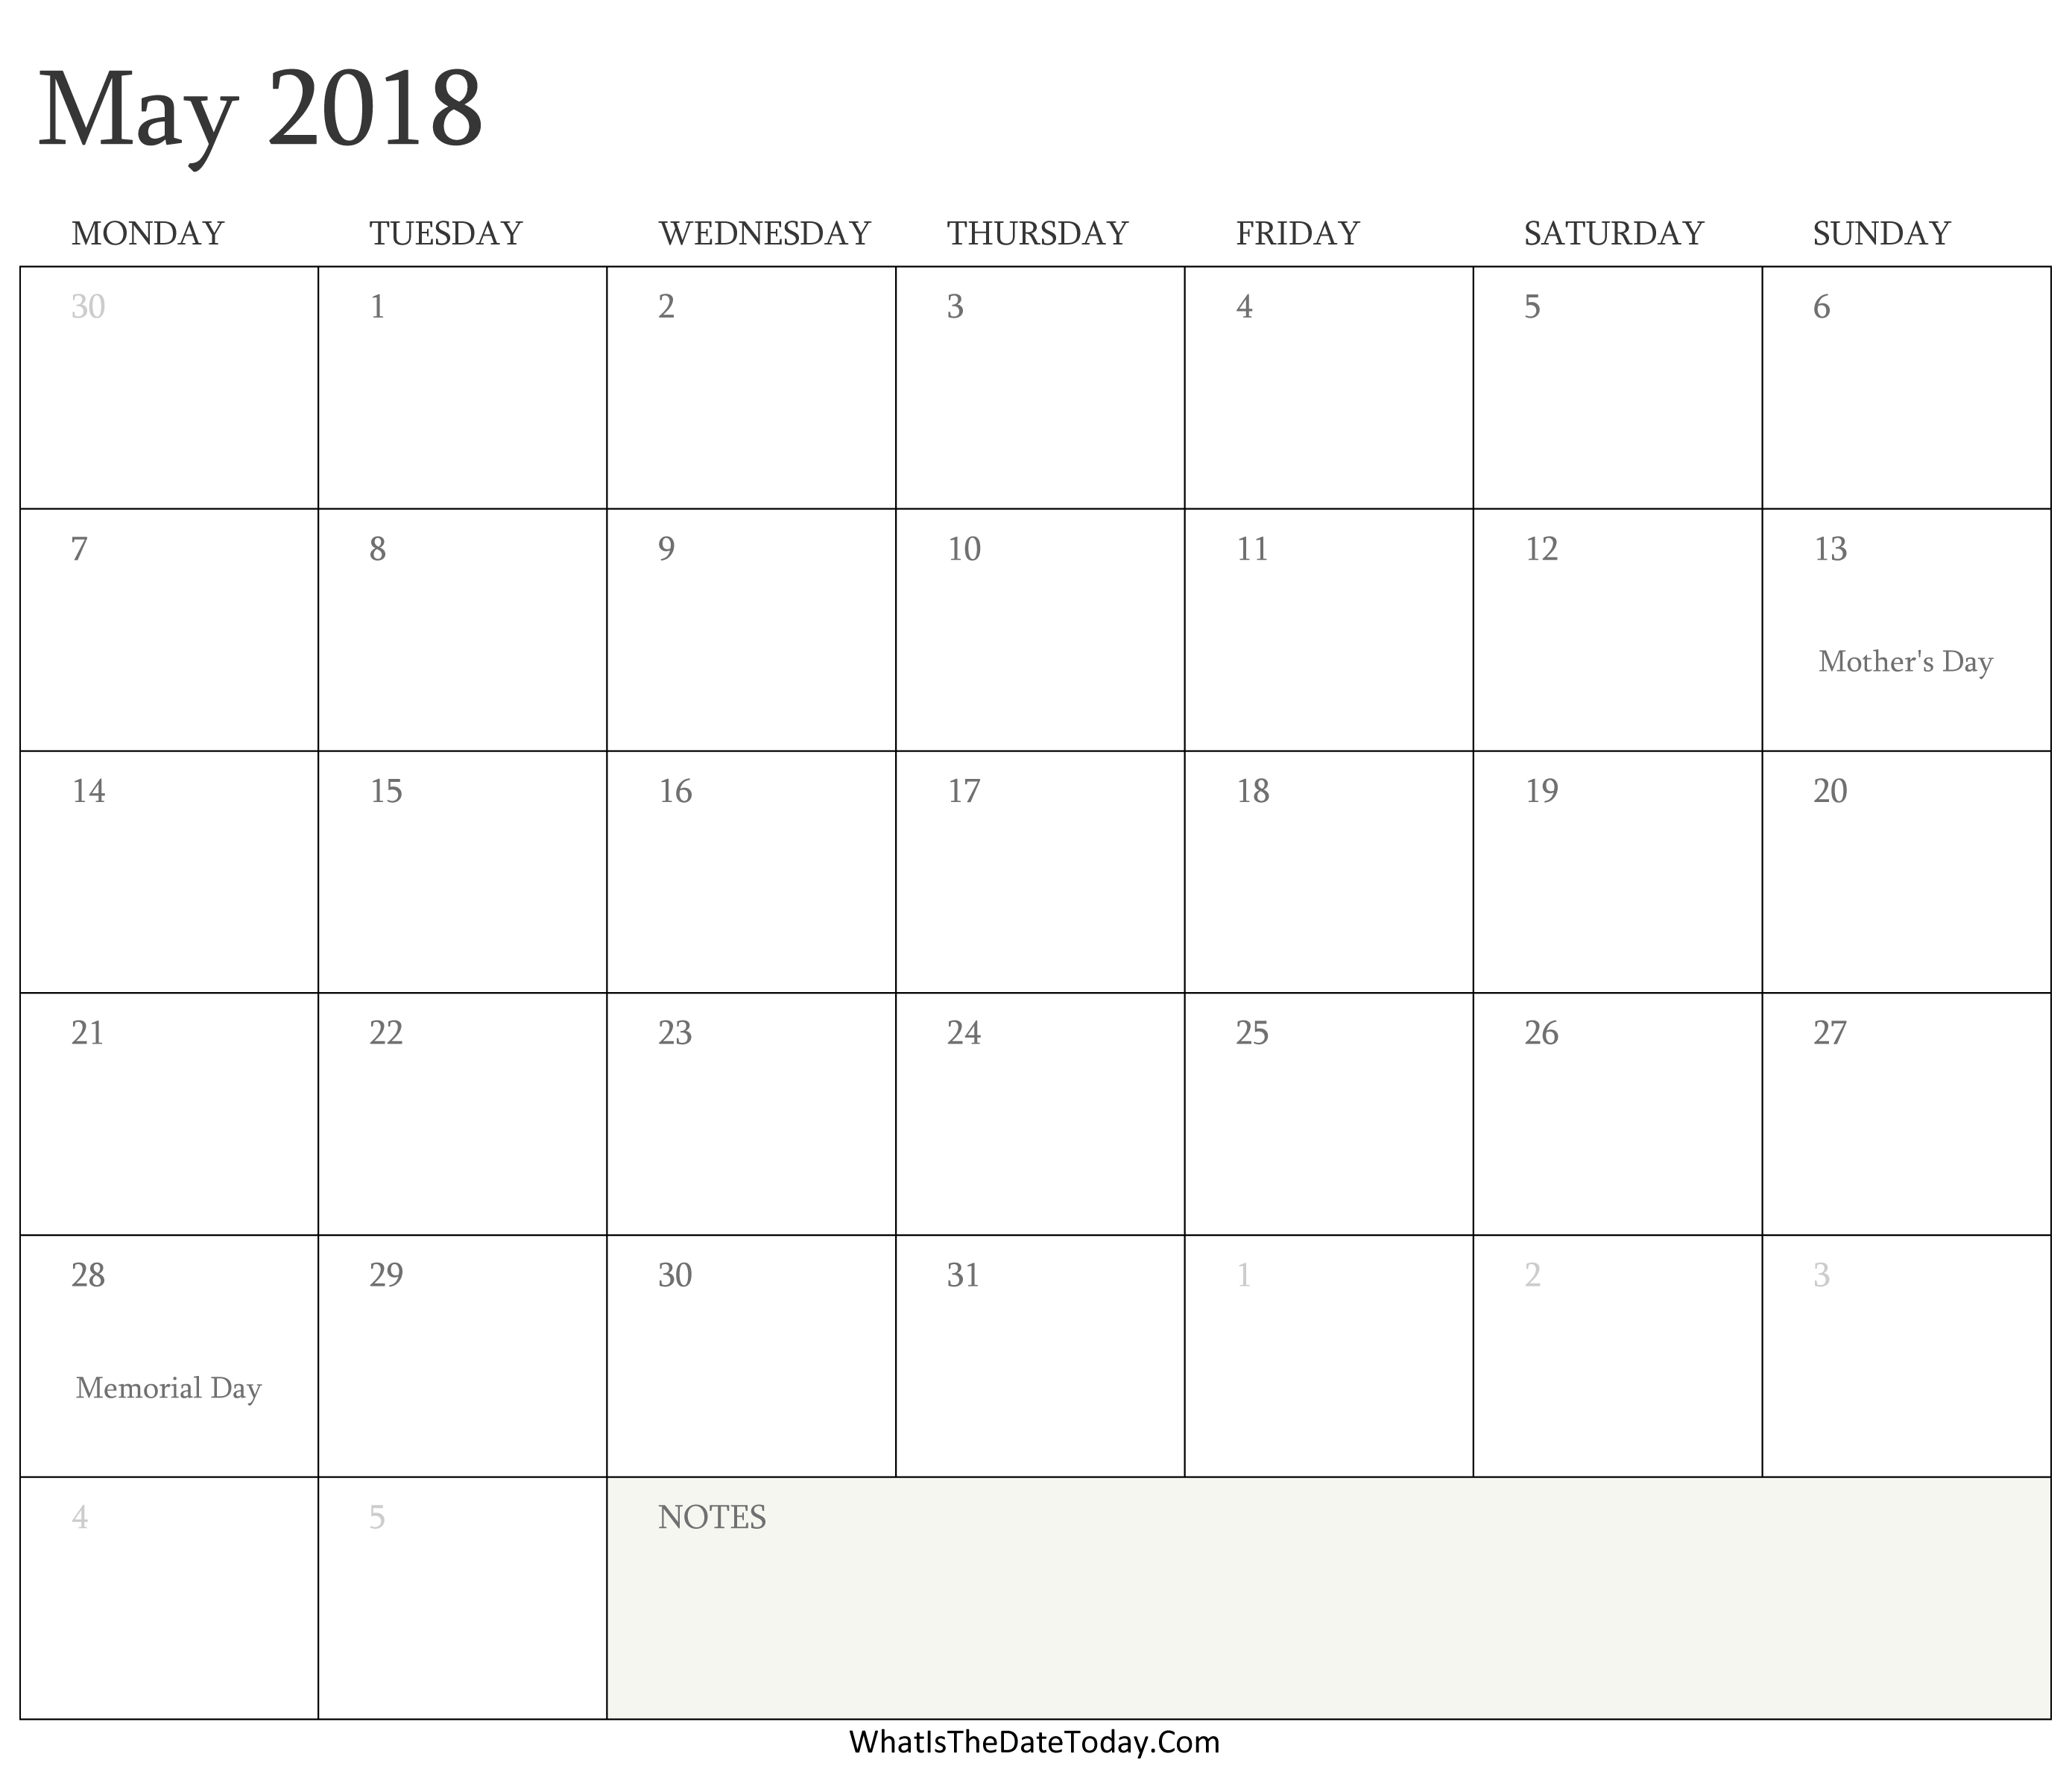 may-2018-us-calendar-with-holidays